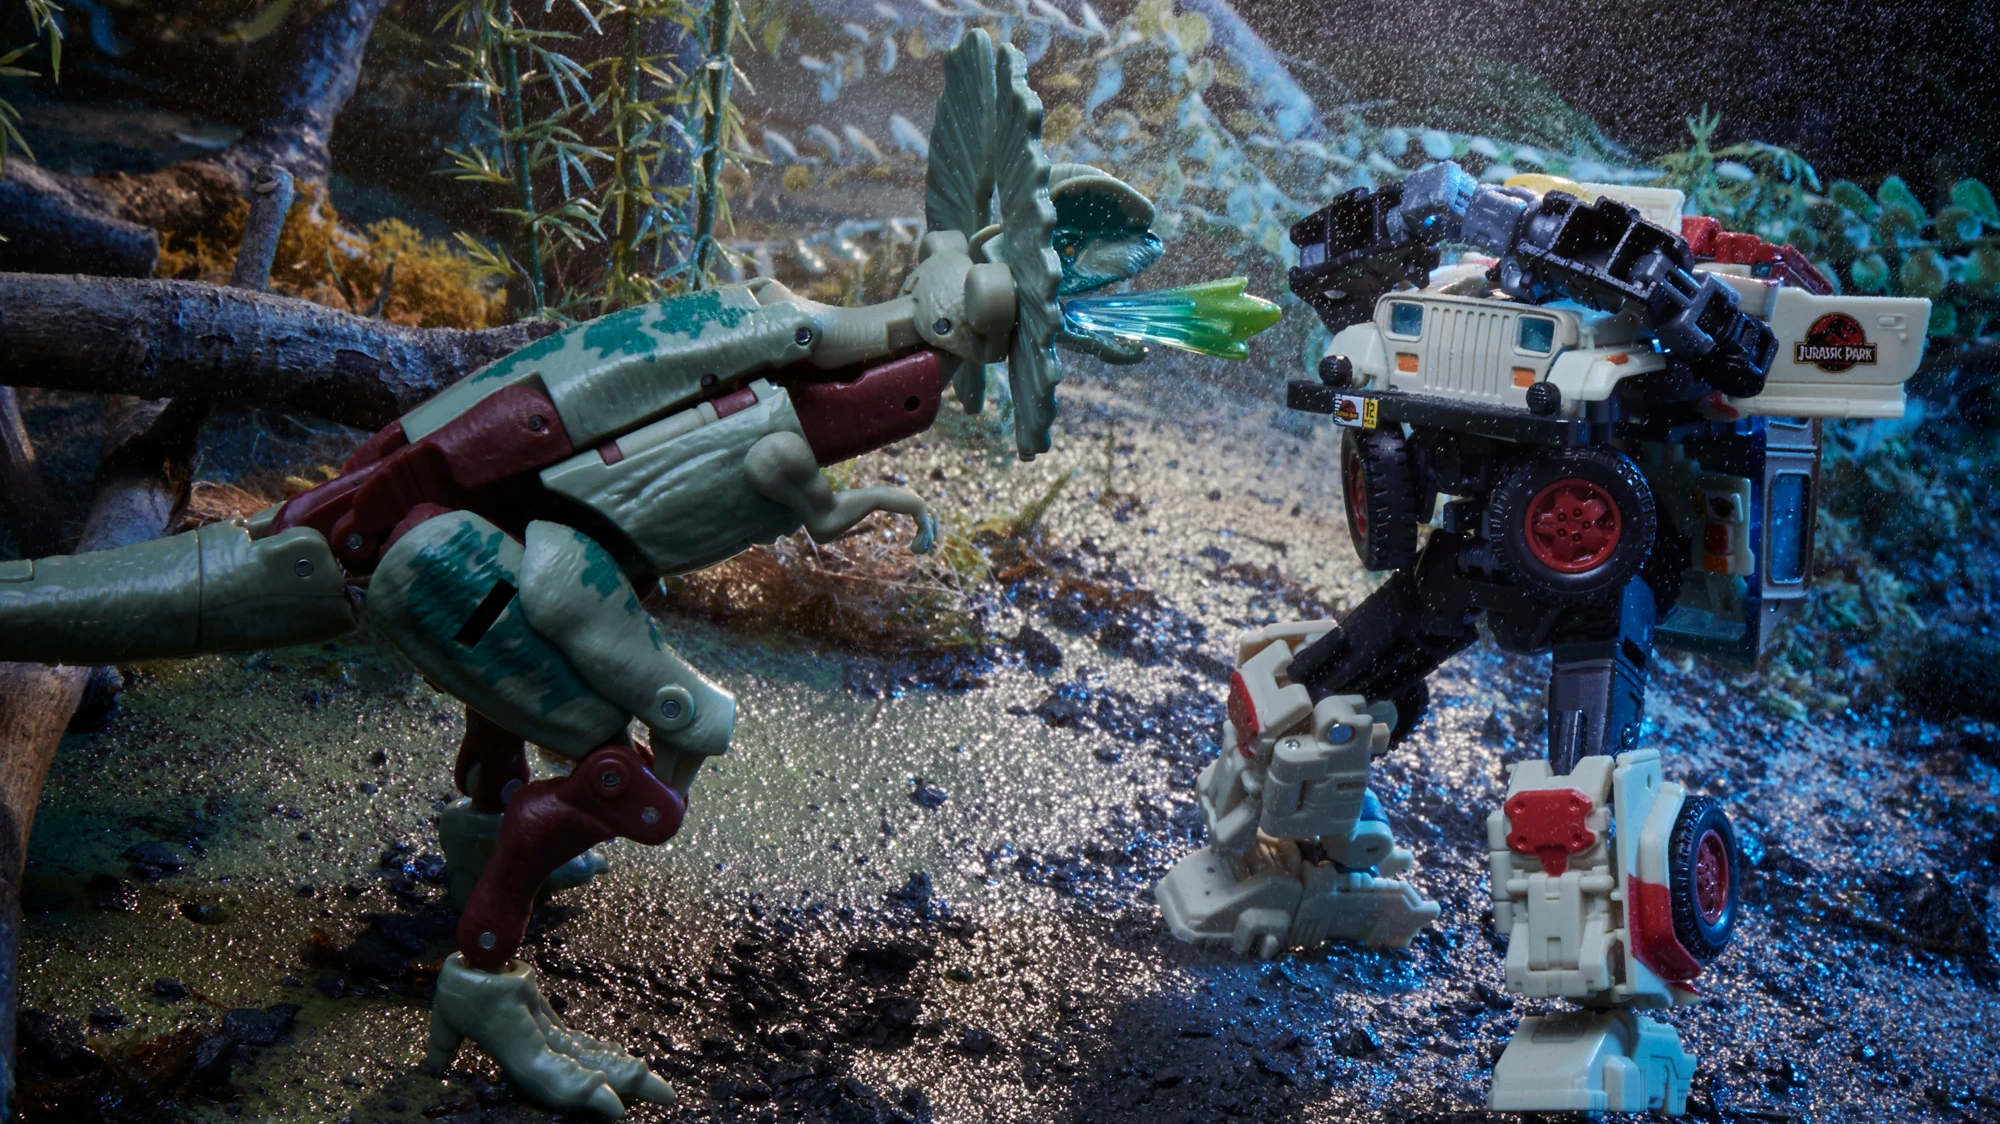 New Transformers and Jurassic Park crossover set is now official thumbnail